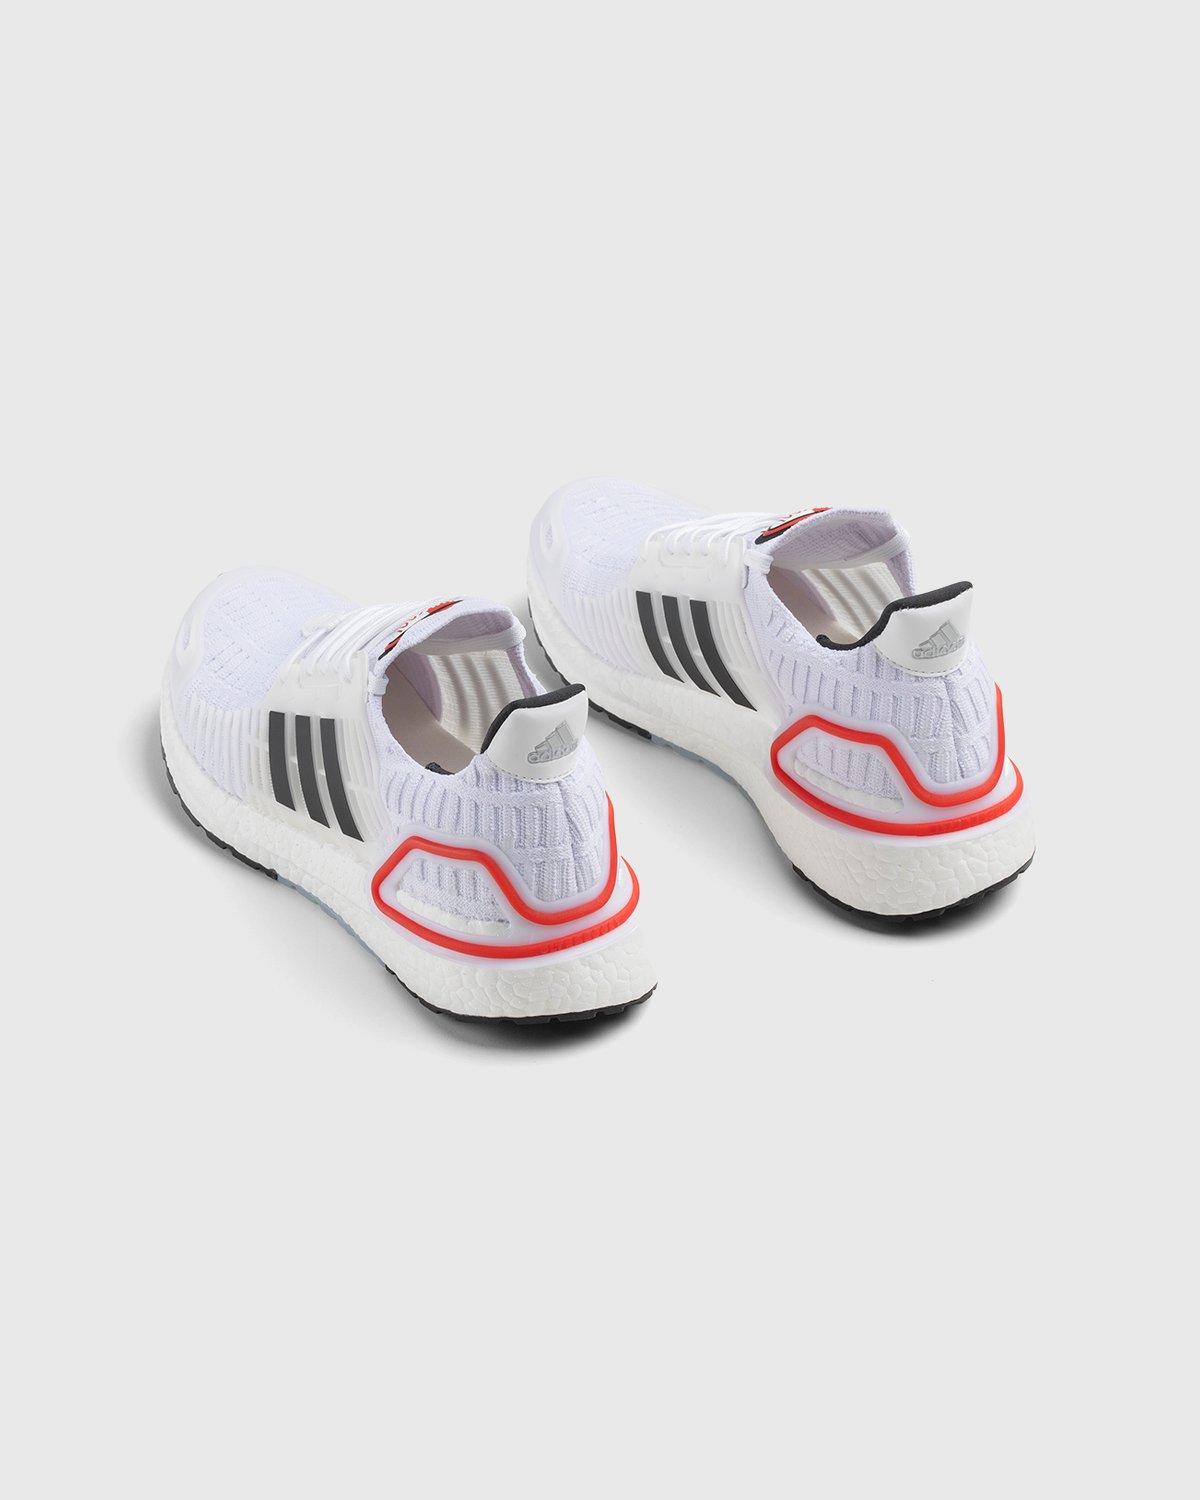 Adidas - Ultraboost Climacool 1 DNA White/Black/Red - Footwear - White - Image 4